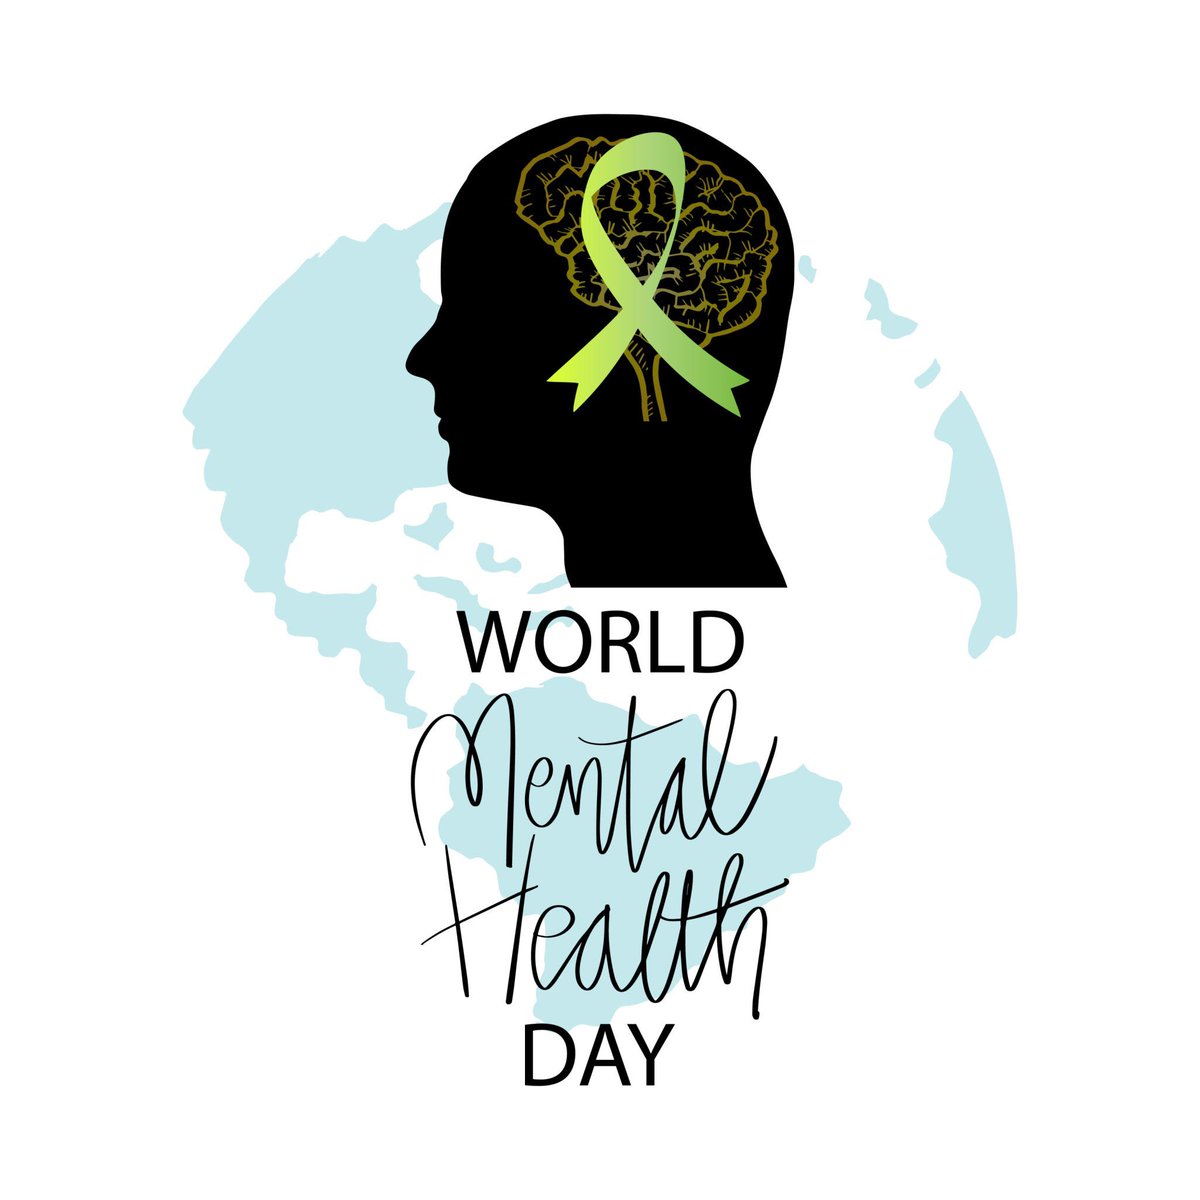 Today is World Mental Health Day! Remember that everyone is battling something and kindness, empathy, and understanding goes a long way! 💚
#champforkids